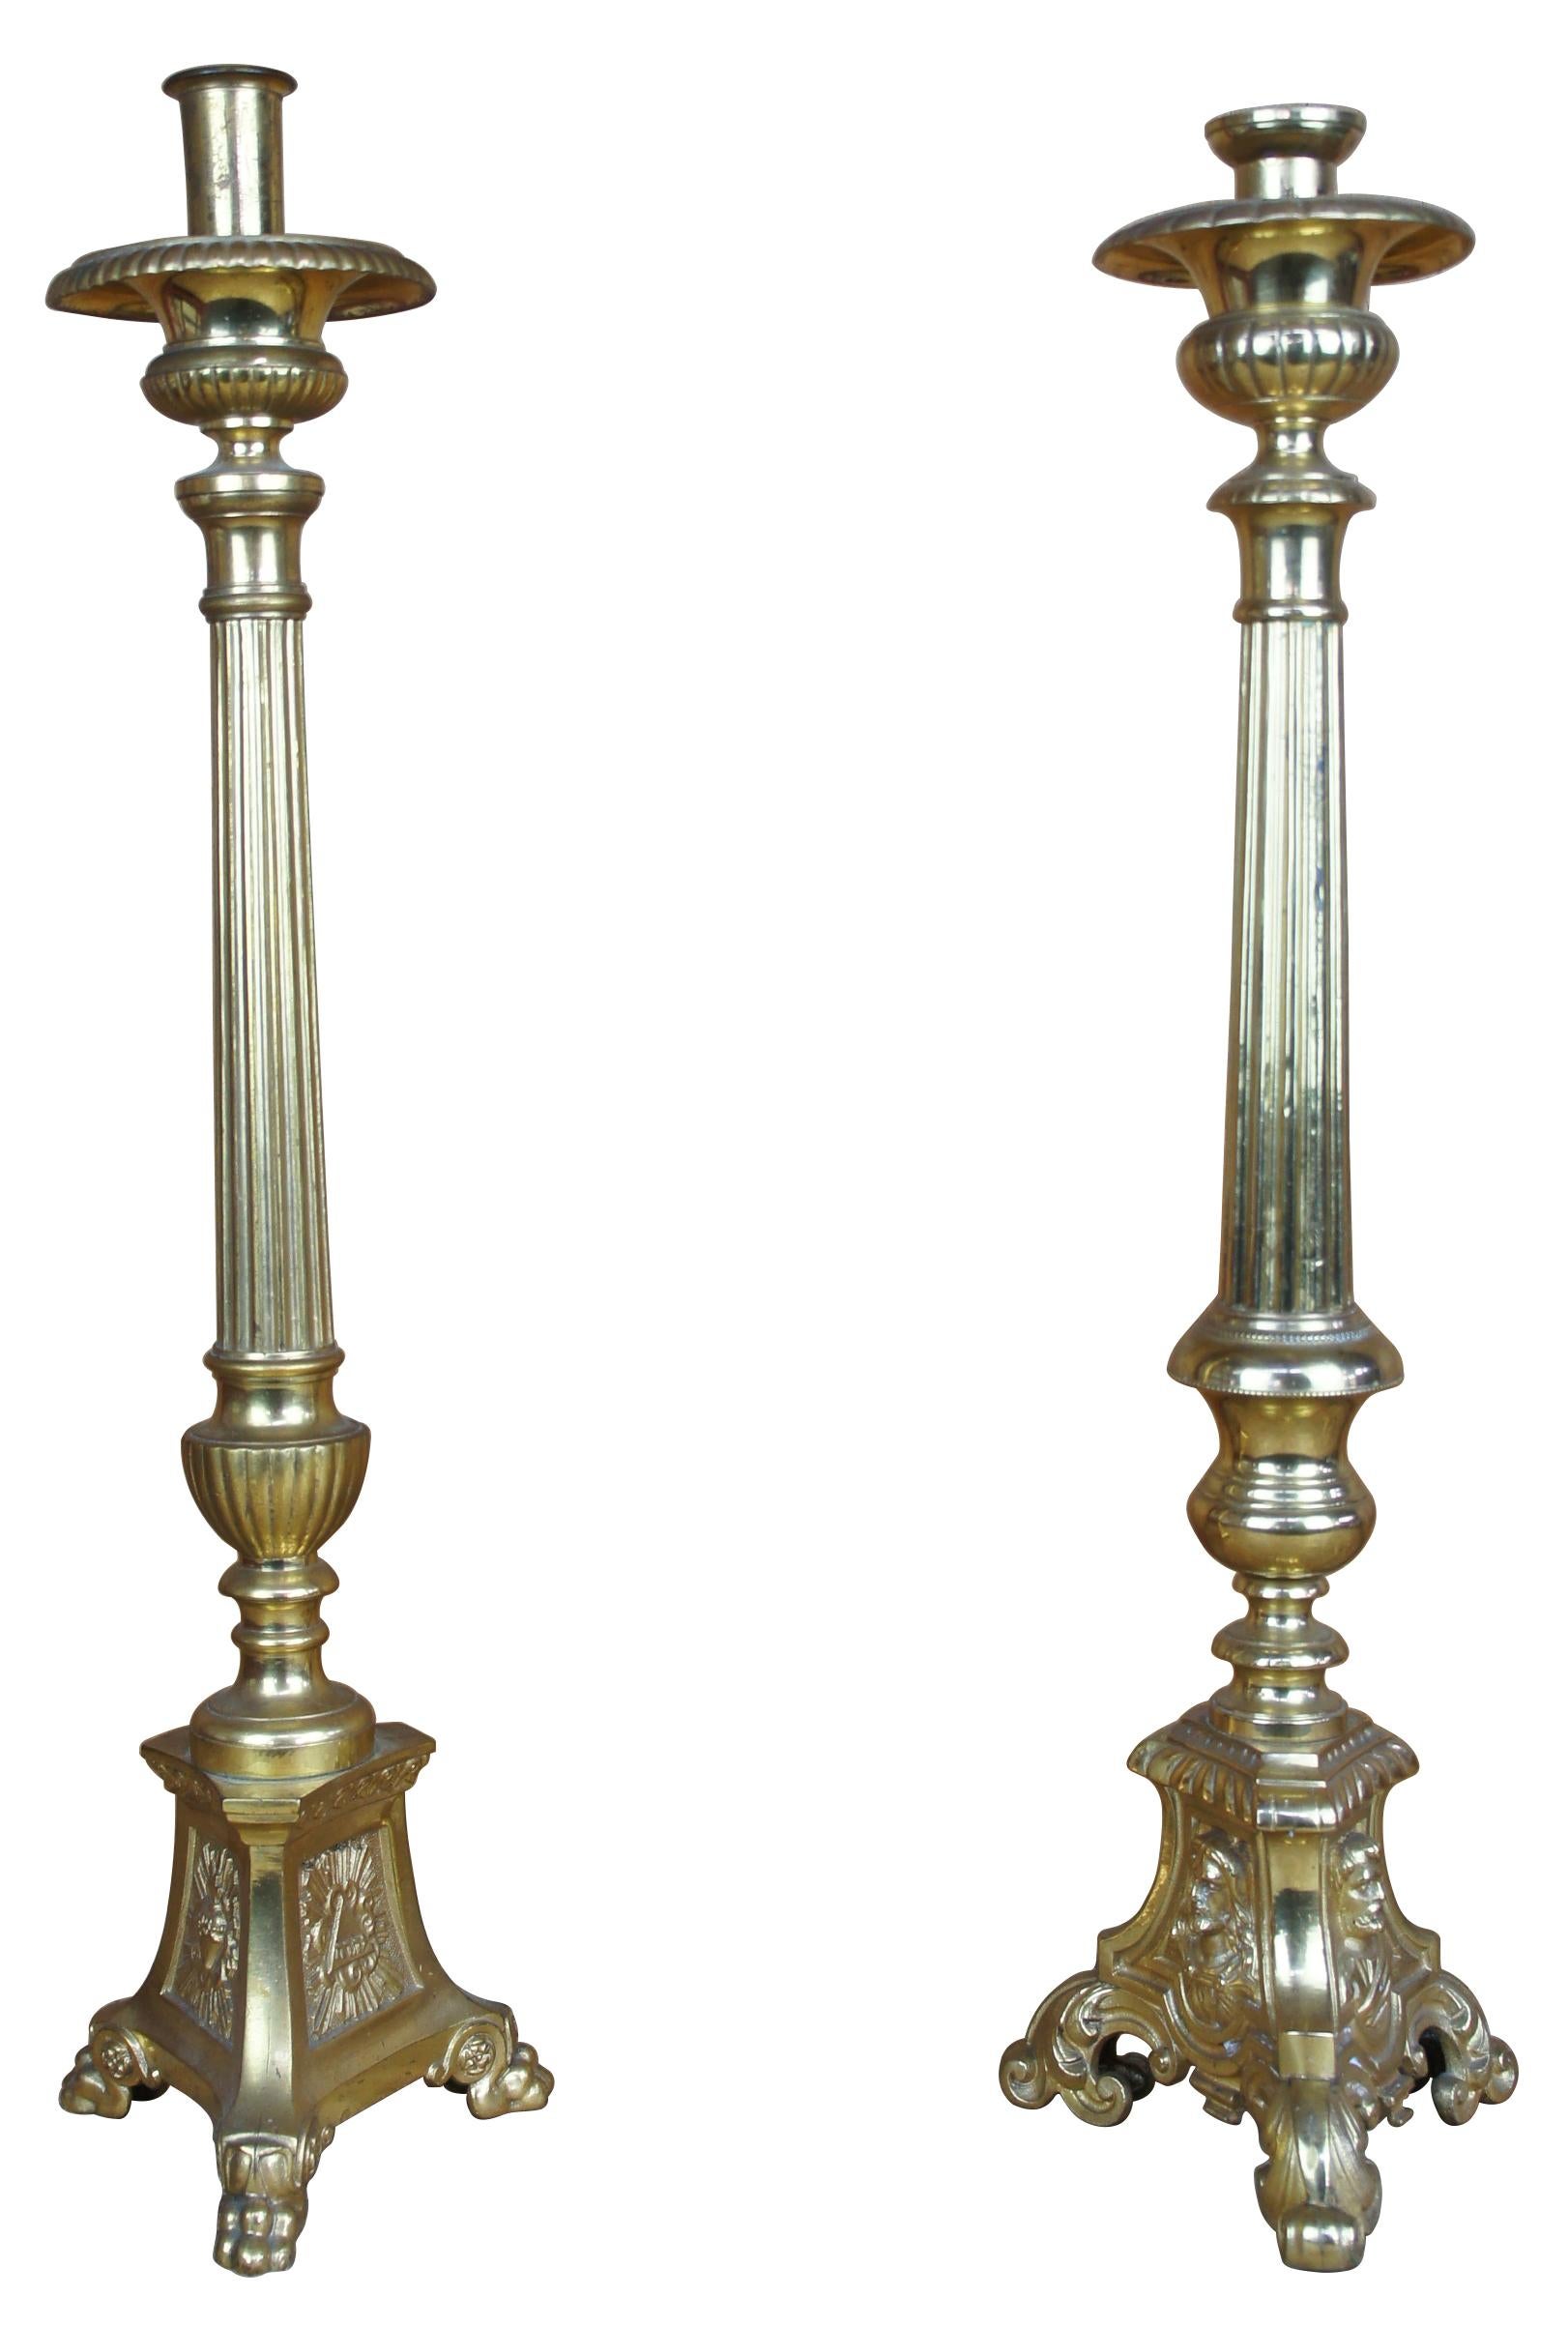 Vintage pair of brass ecclesiastical church alter candlesticks featuring Jesus, Mary and Joseph. Slightly different designs. Measures:22